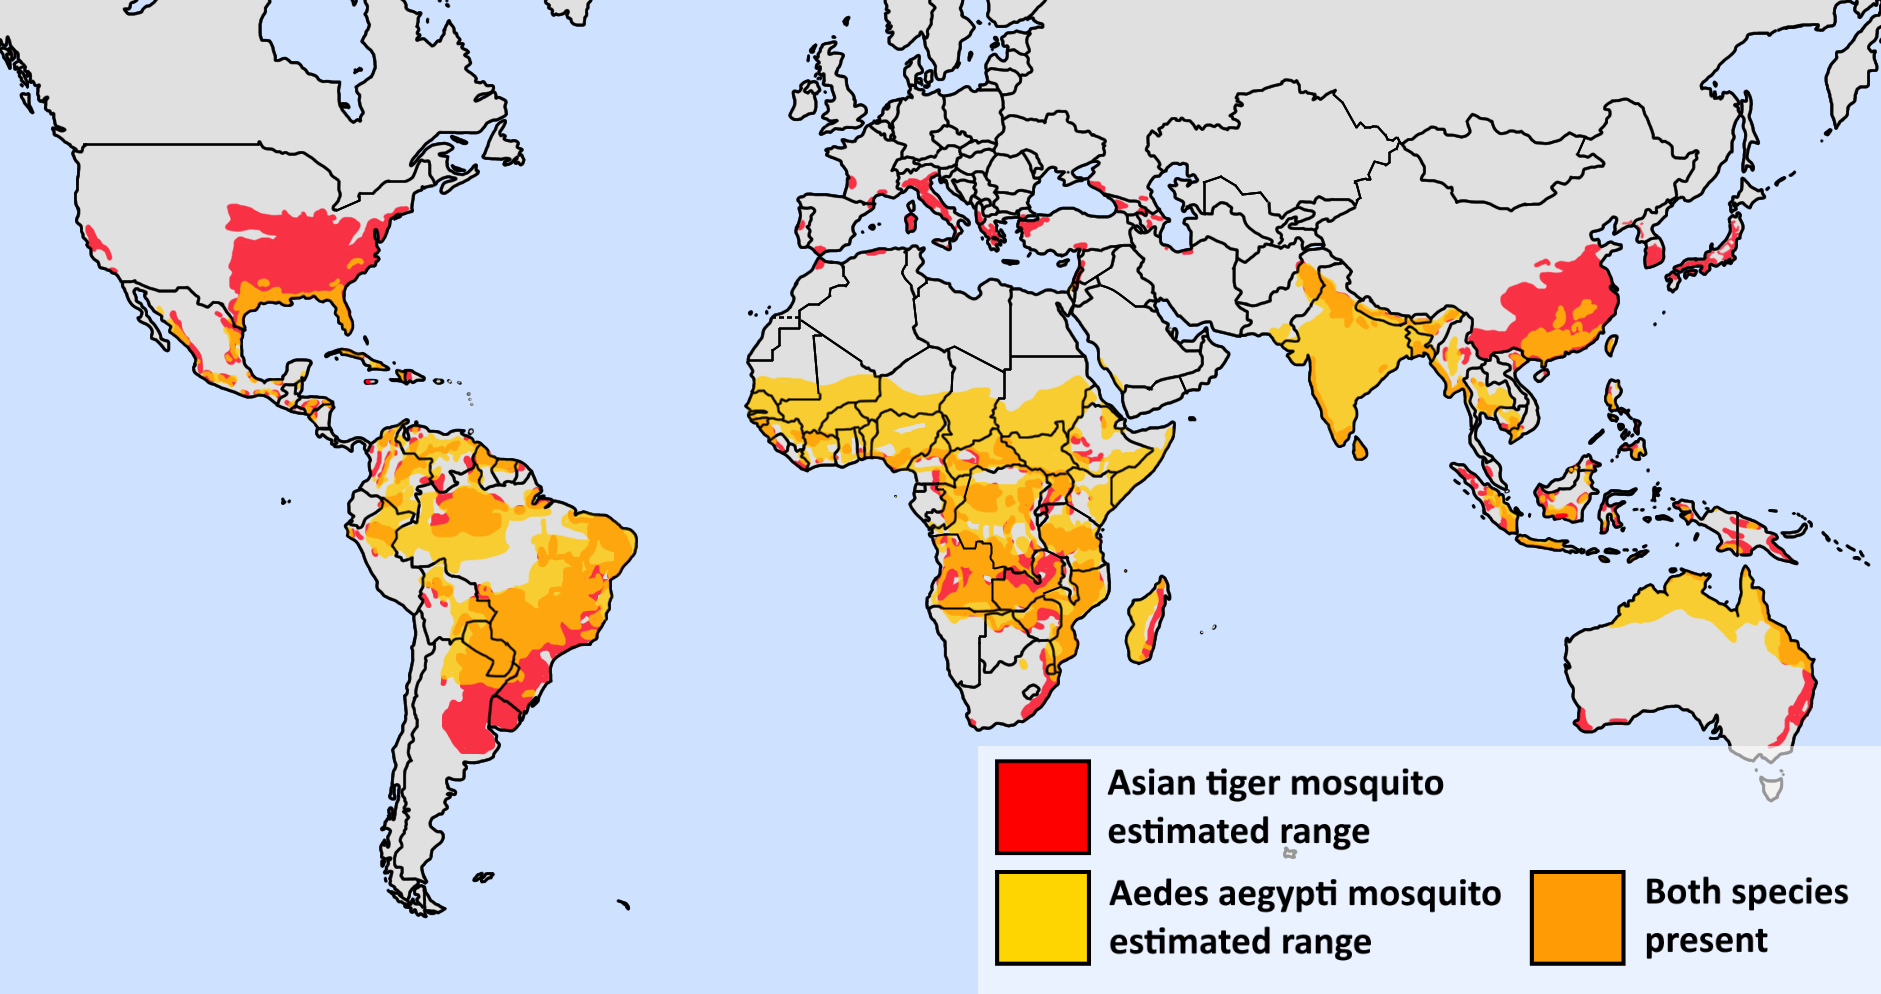 asian-tiger-aedes-aegypti-combined-mosquito-map-safety-first-aid-01.png?profile=RESIZE_584x